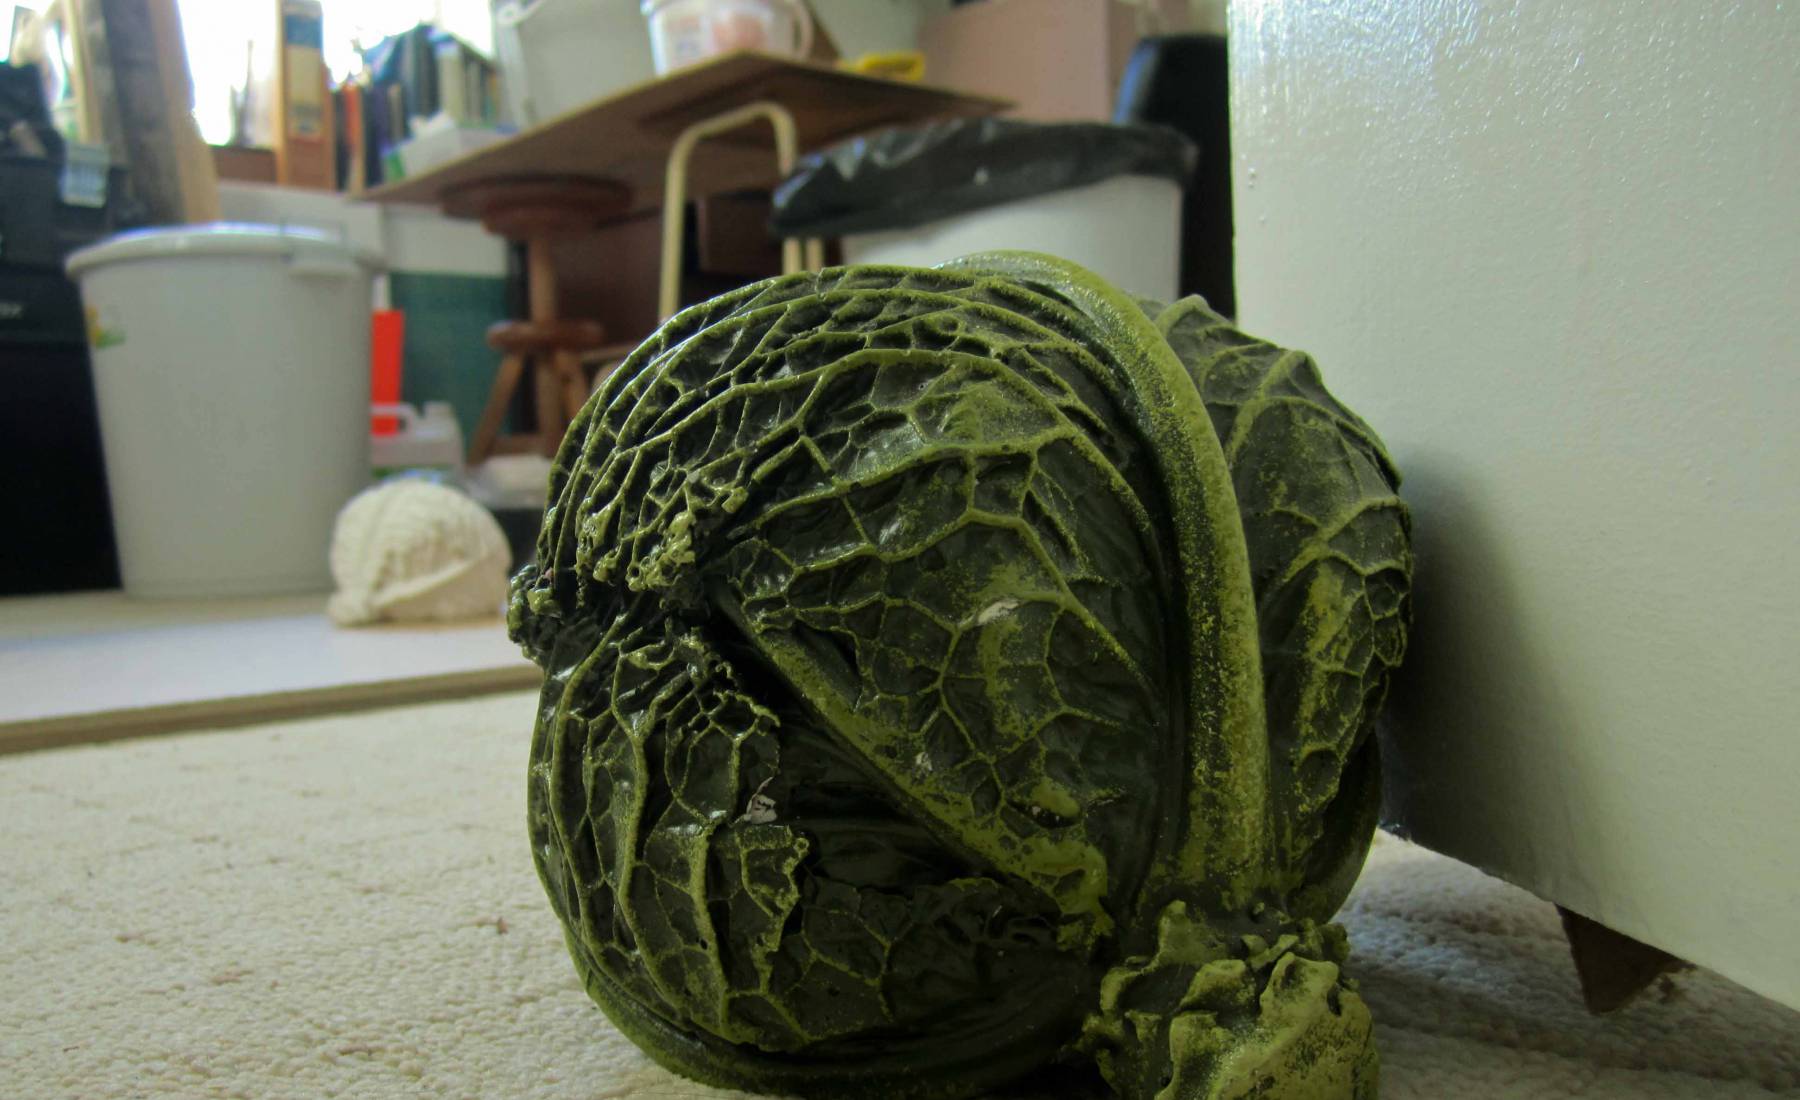 resin cabbage, vegtables, fake food, doorstop, green, realistic, cast, water based resin, vegetable shop, galley kitchen